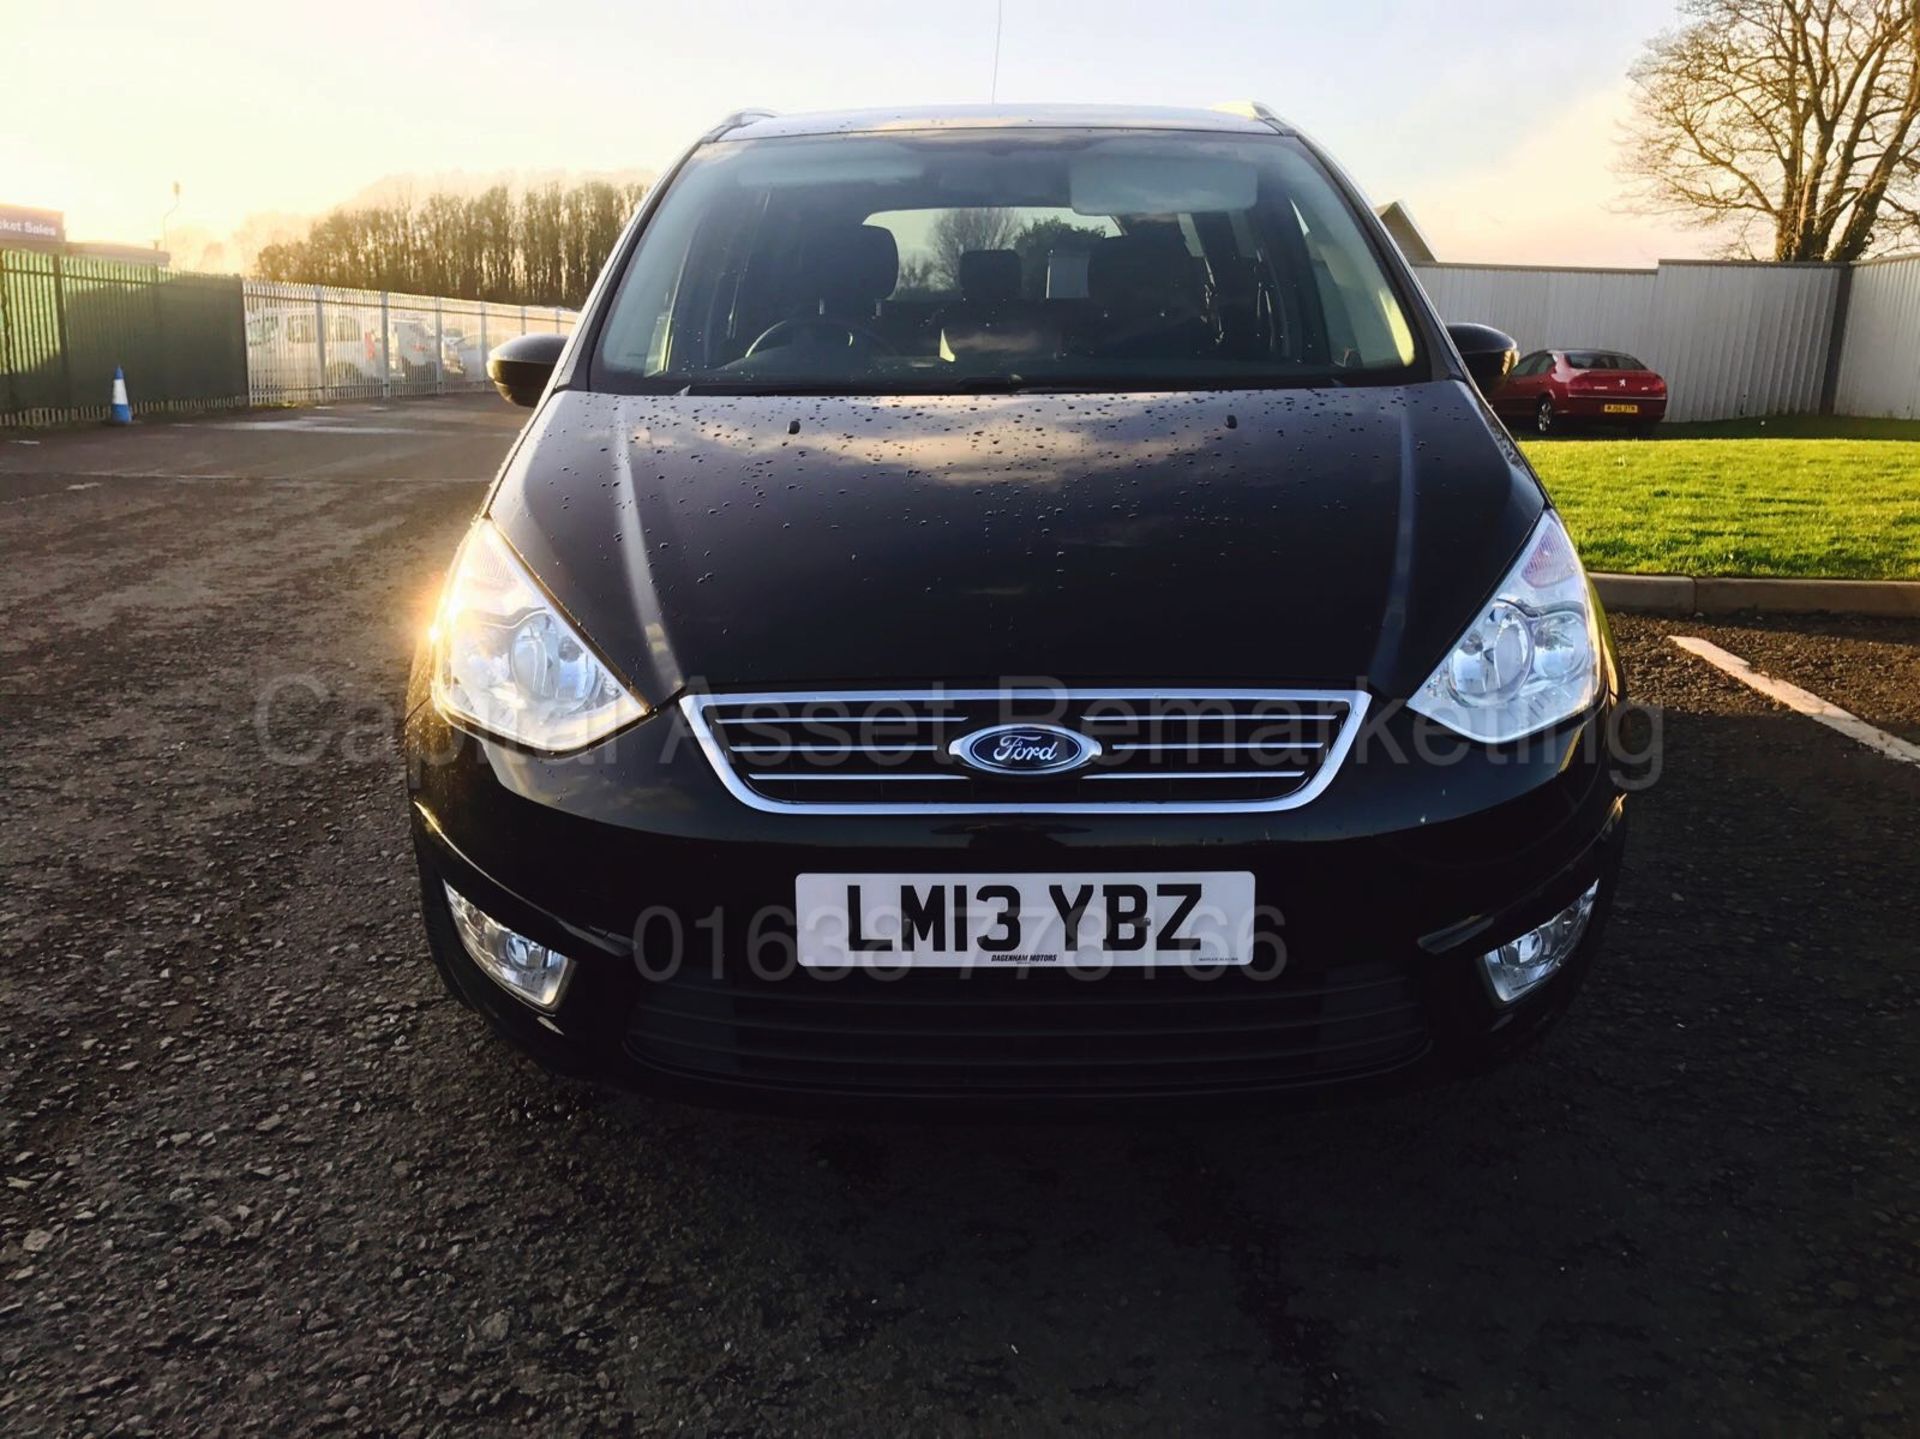 FORD GALAXY 'ZETEC' 7 SEATER (2013 - 13 REG) 2.0 TDCI - 140 BHP POWER SHIFT (1 OWNER) *FULL HISTORY* - Image 2 of 14